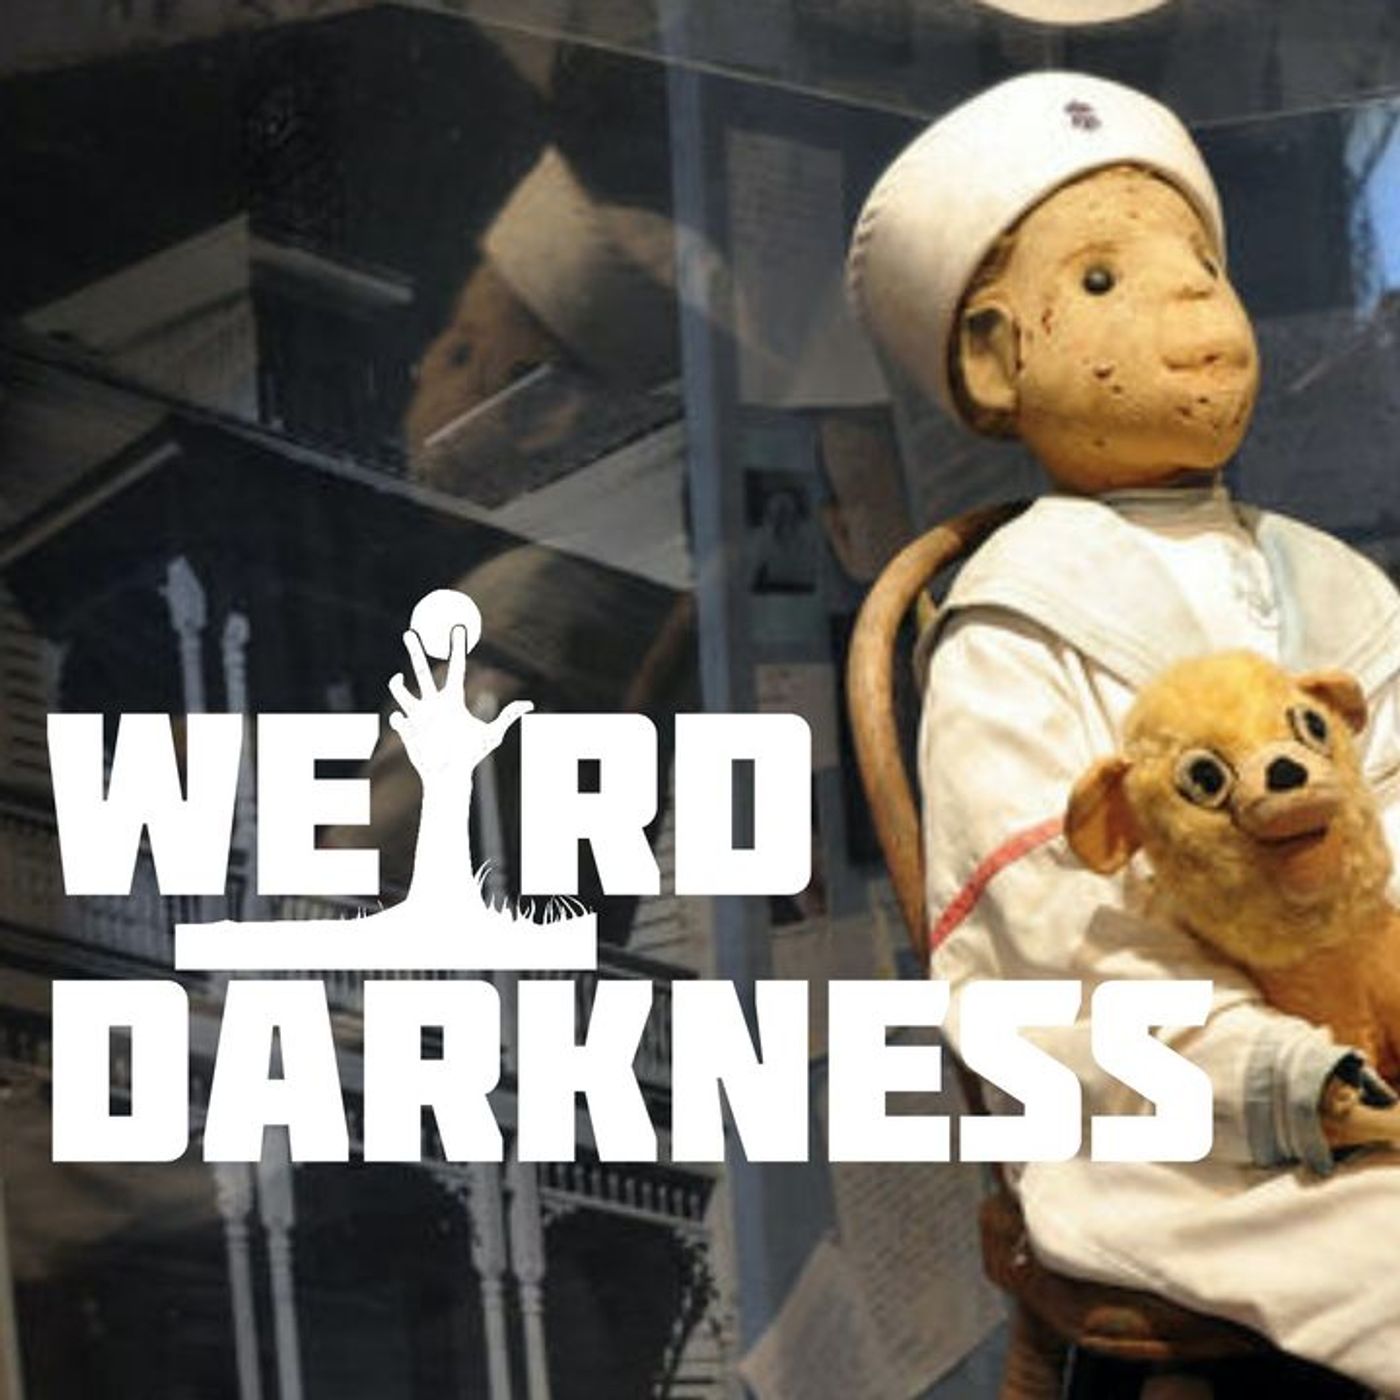 “THE TERRIFYING TRUE STORY OF ROBERT THE DOLL” and More True Paranormal Horrors! #WeirdDarkness